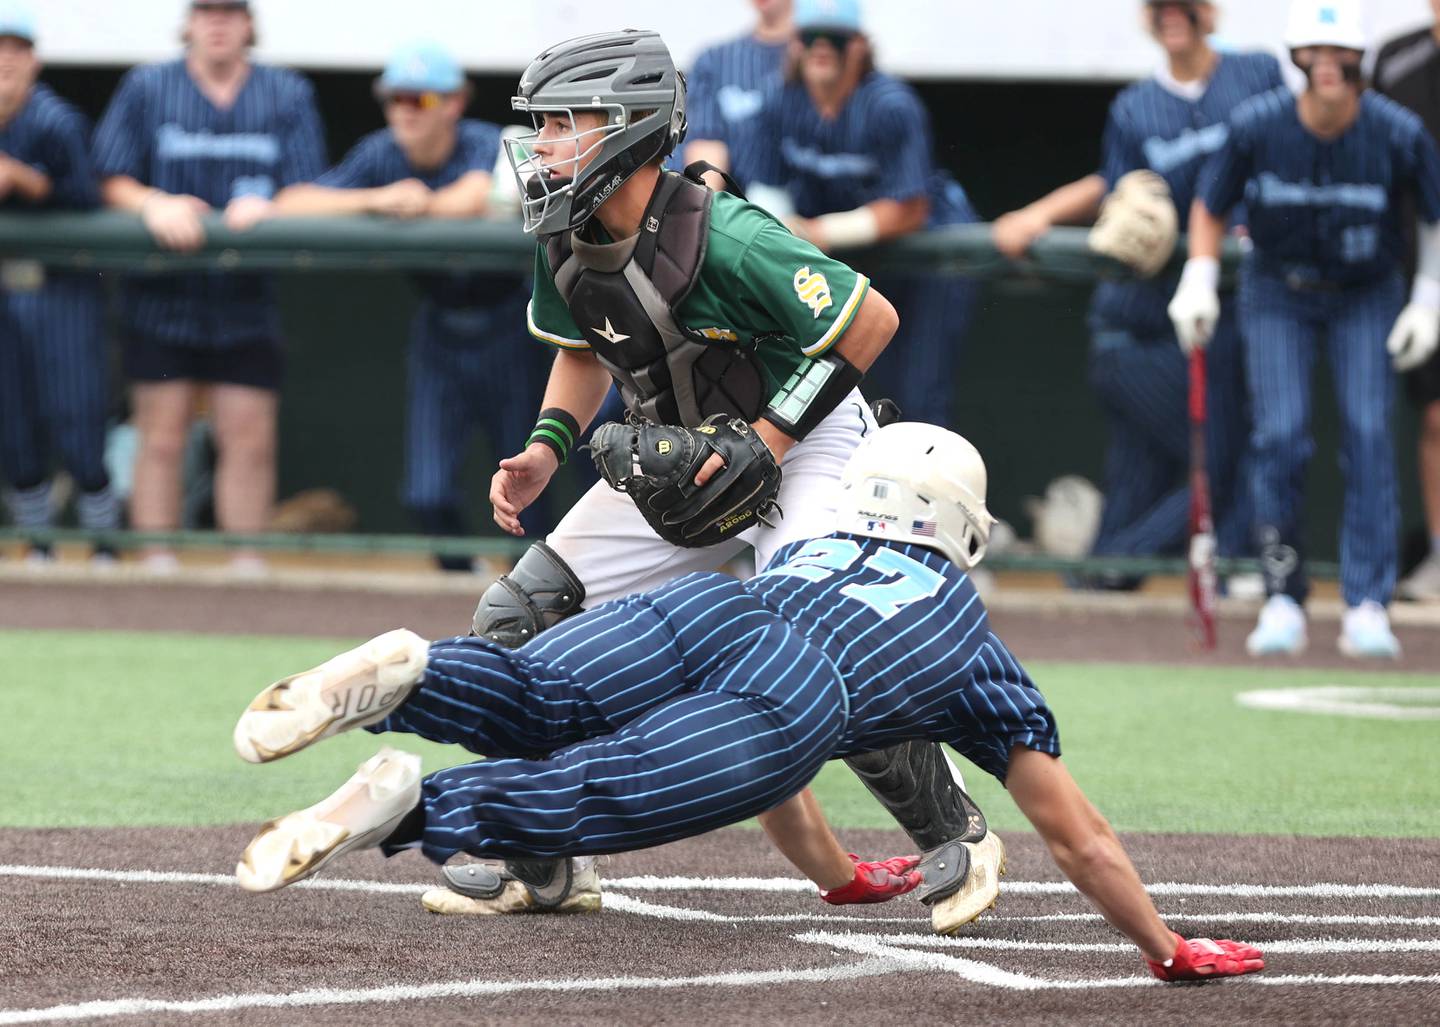 Nazareth's David Cox scores a run as Crystal Lake South's Kyle Kuffel waits for the throw Friday, June 10, 2022, during their IHSA Class 3A state semifinal game at Duly Health and Care Field in Joliet.